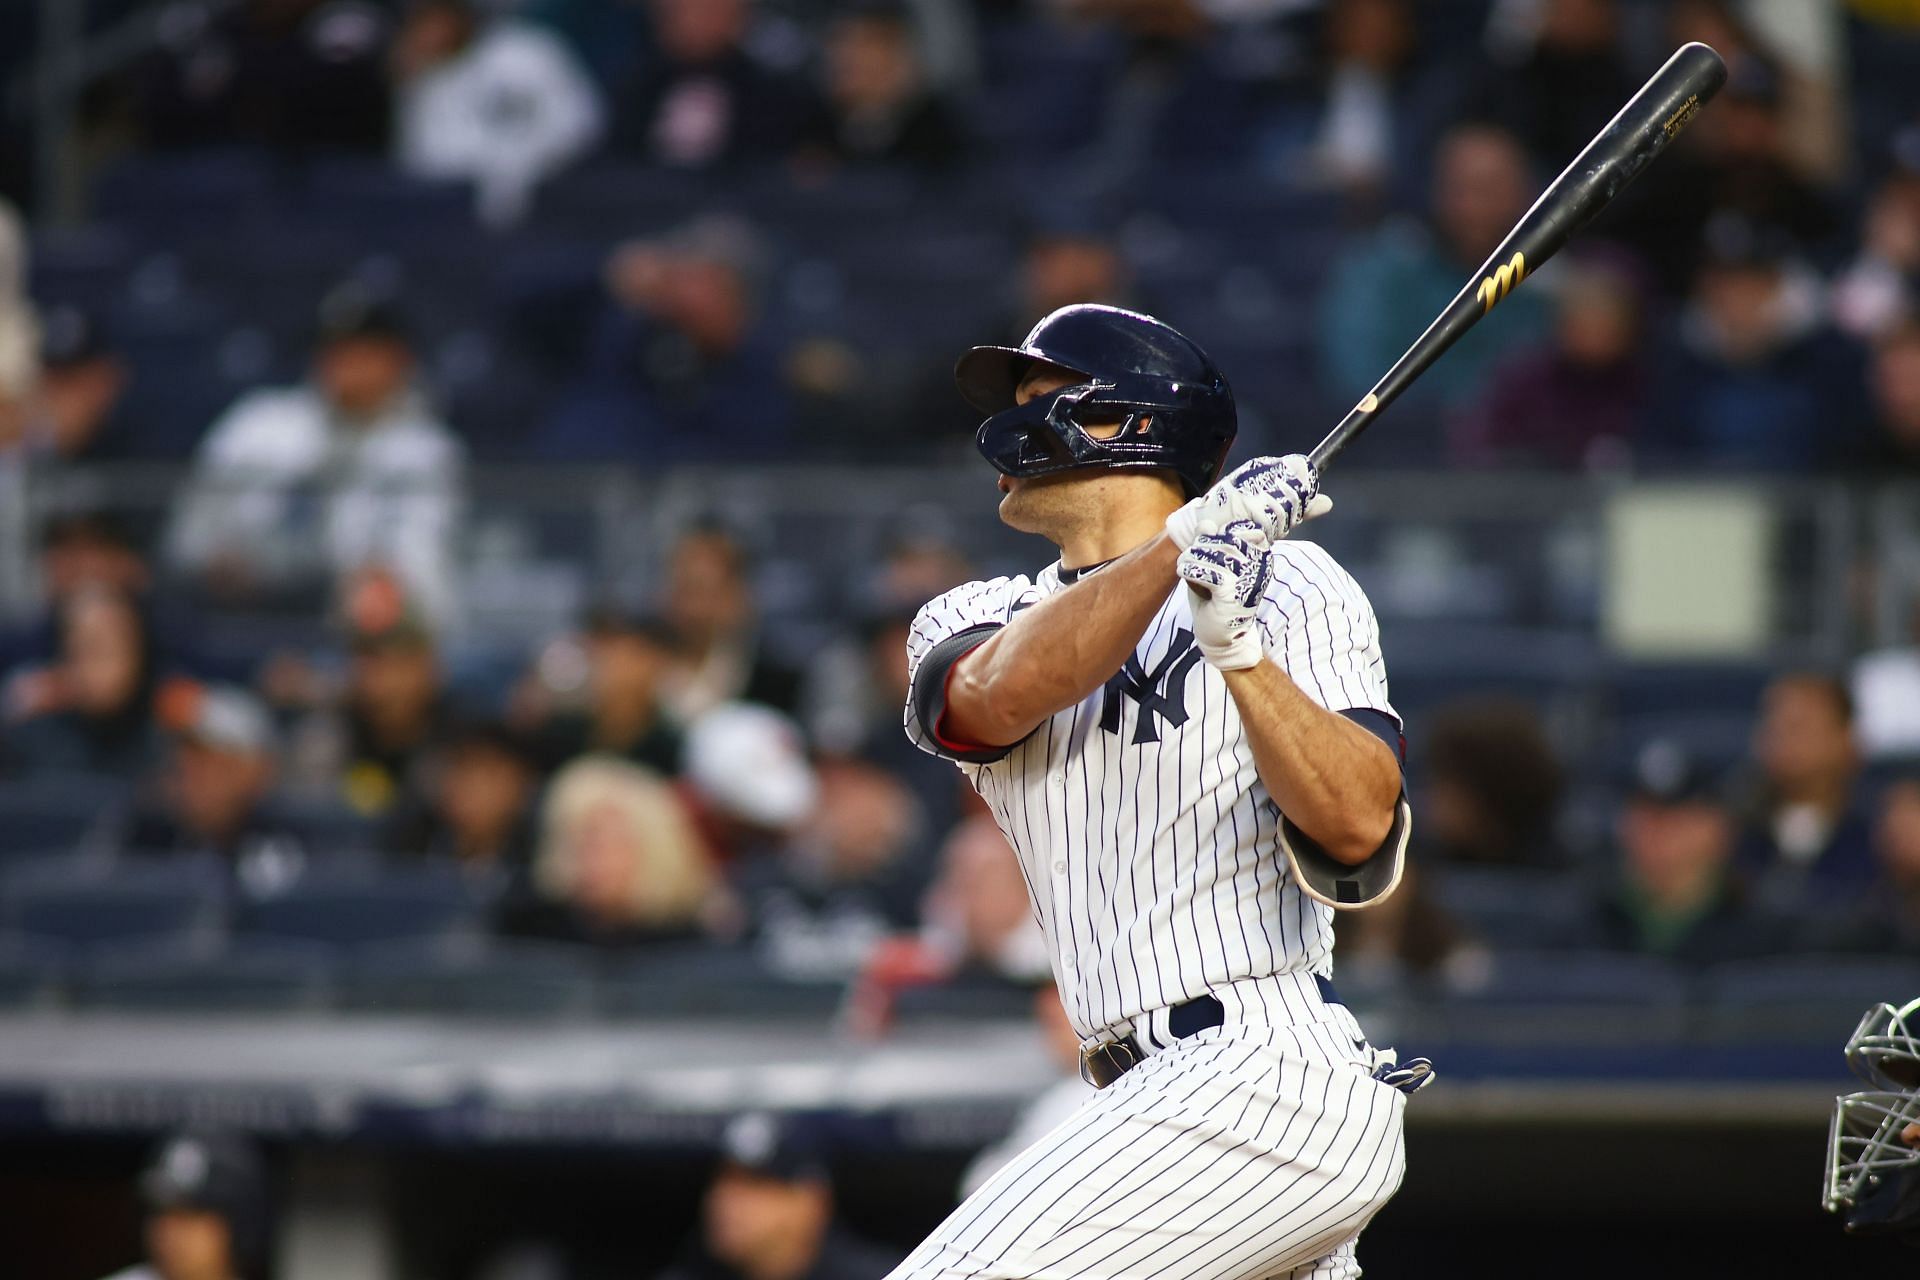 Yankees outfielder Giancarlo Stanton blasts his third home run of the season at Yankee Stadium last night, becoming the seventh fastest player to hit 350 home runs.